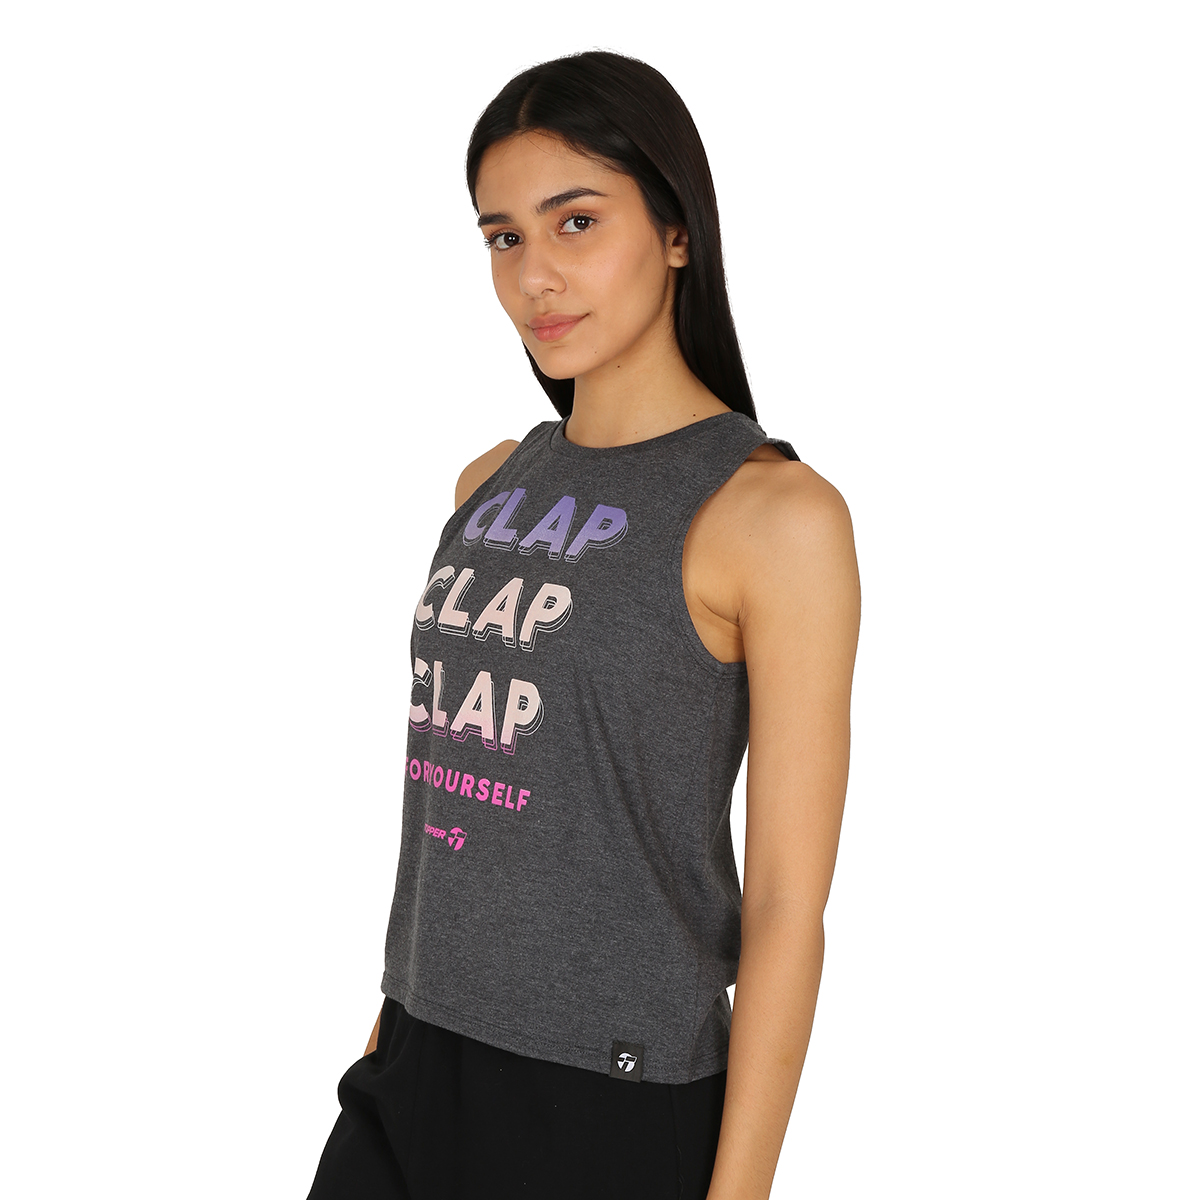 Musculosa Topper Clap,  image number null